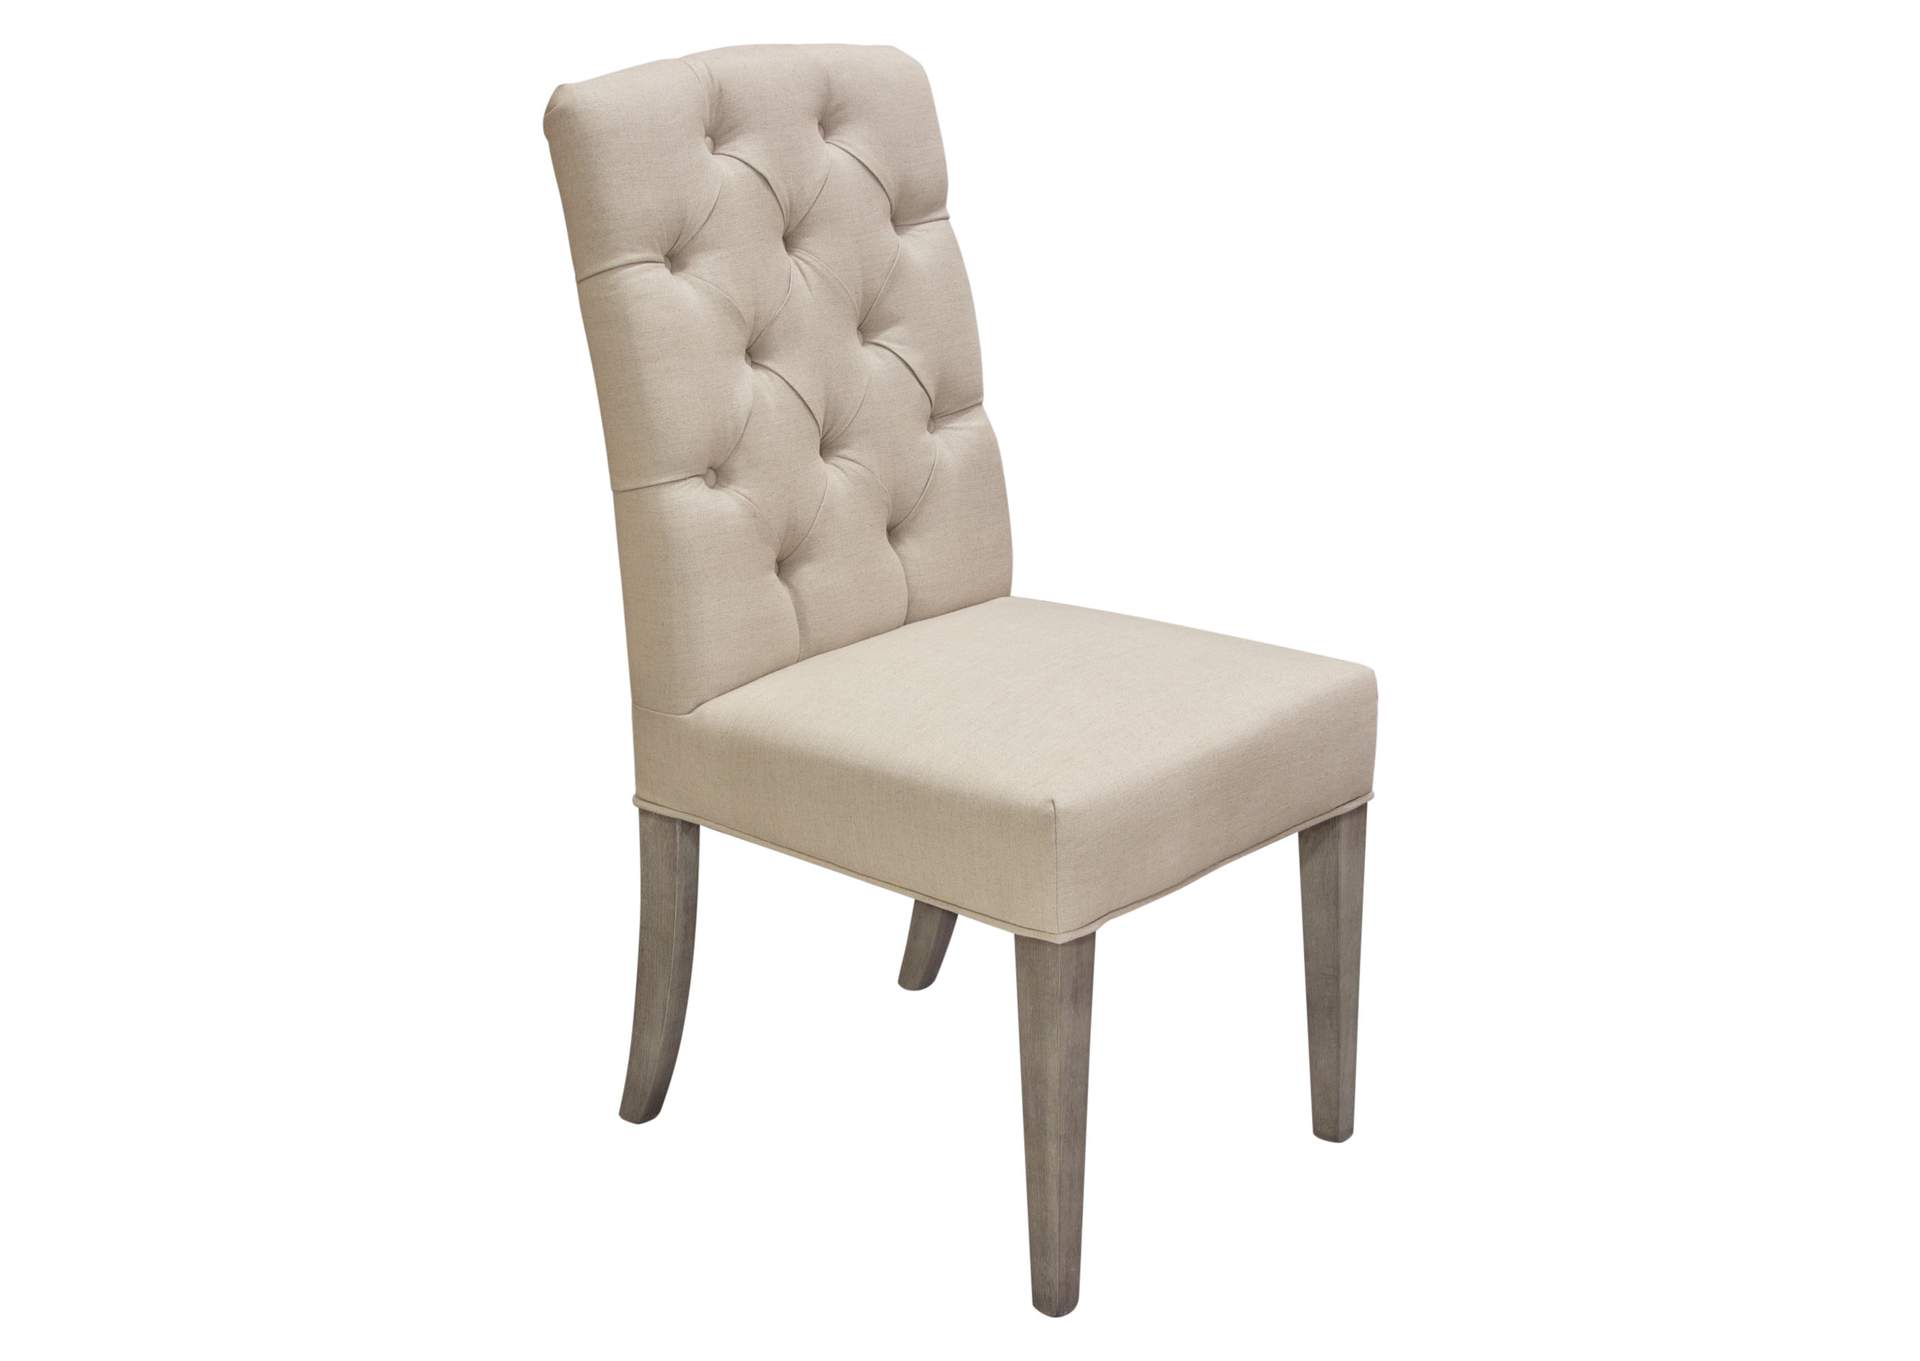 Set of Two Napa Tufted Dining Side Chairs in Sand Linen Fabric with Wood Legs in Grey Oak Finish by Diamond Sofa,Diamond Sofa